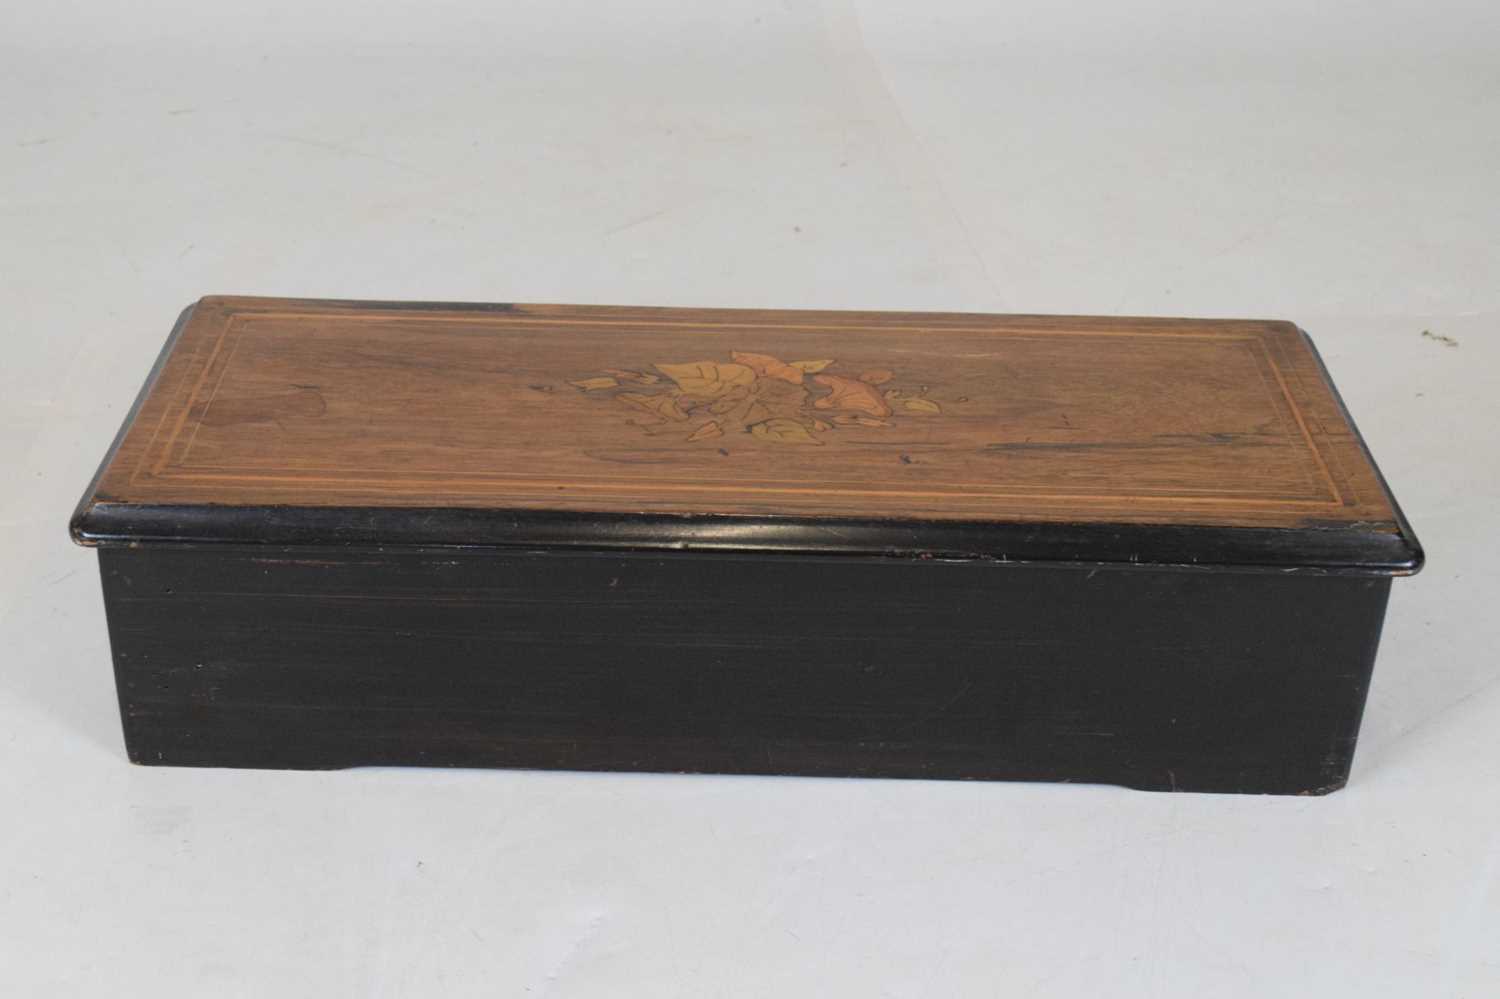 PVF - Late 19th Century inlaid rosewood cylinder musical box playing 12 airs - Image 11 of 14